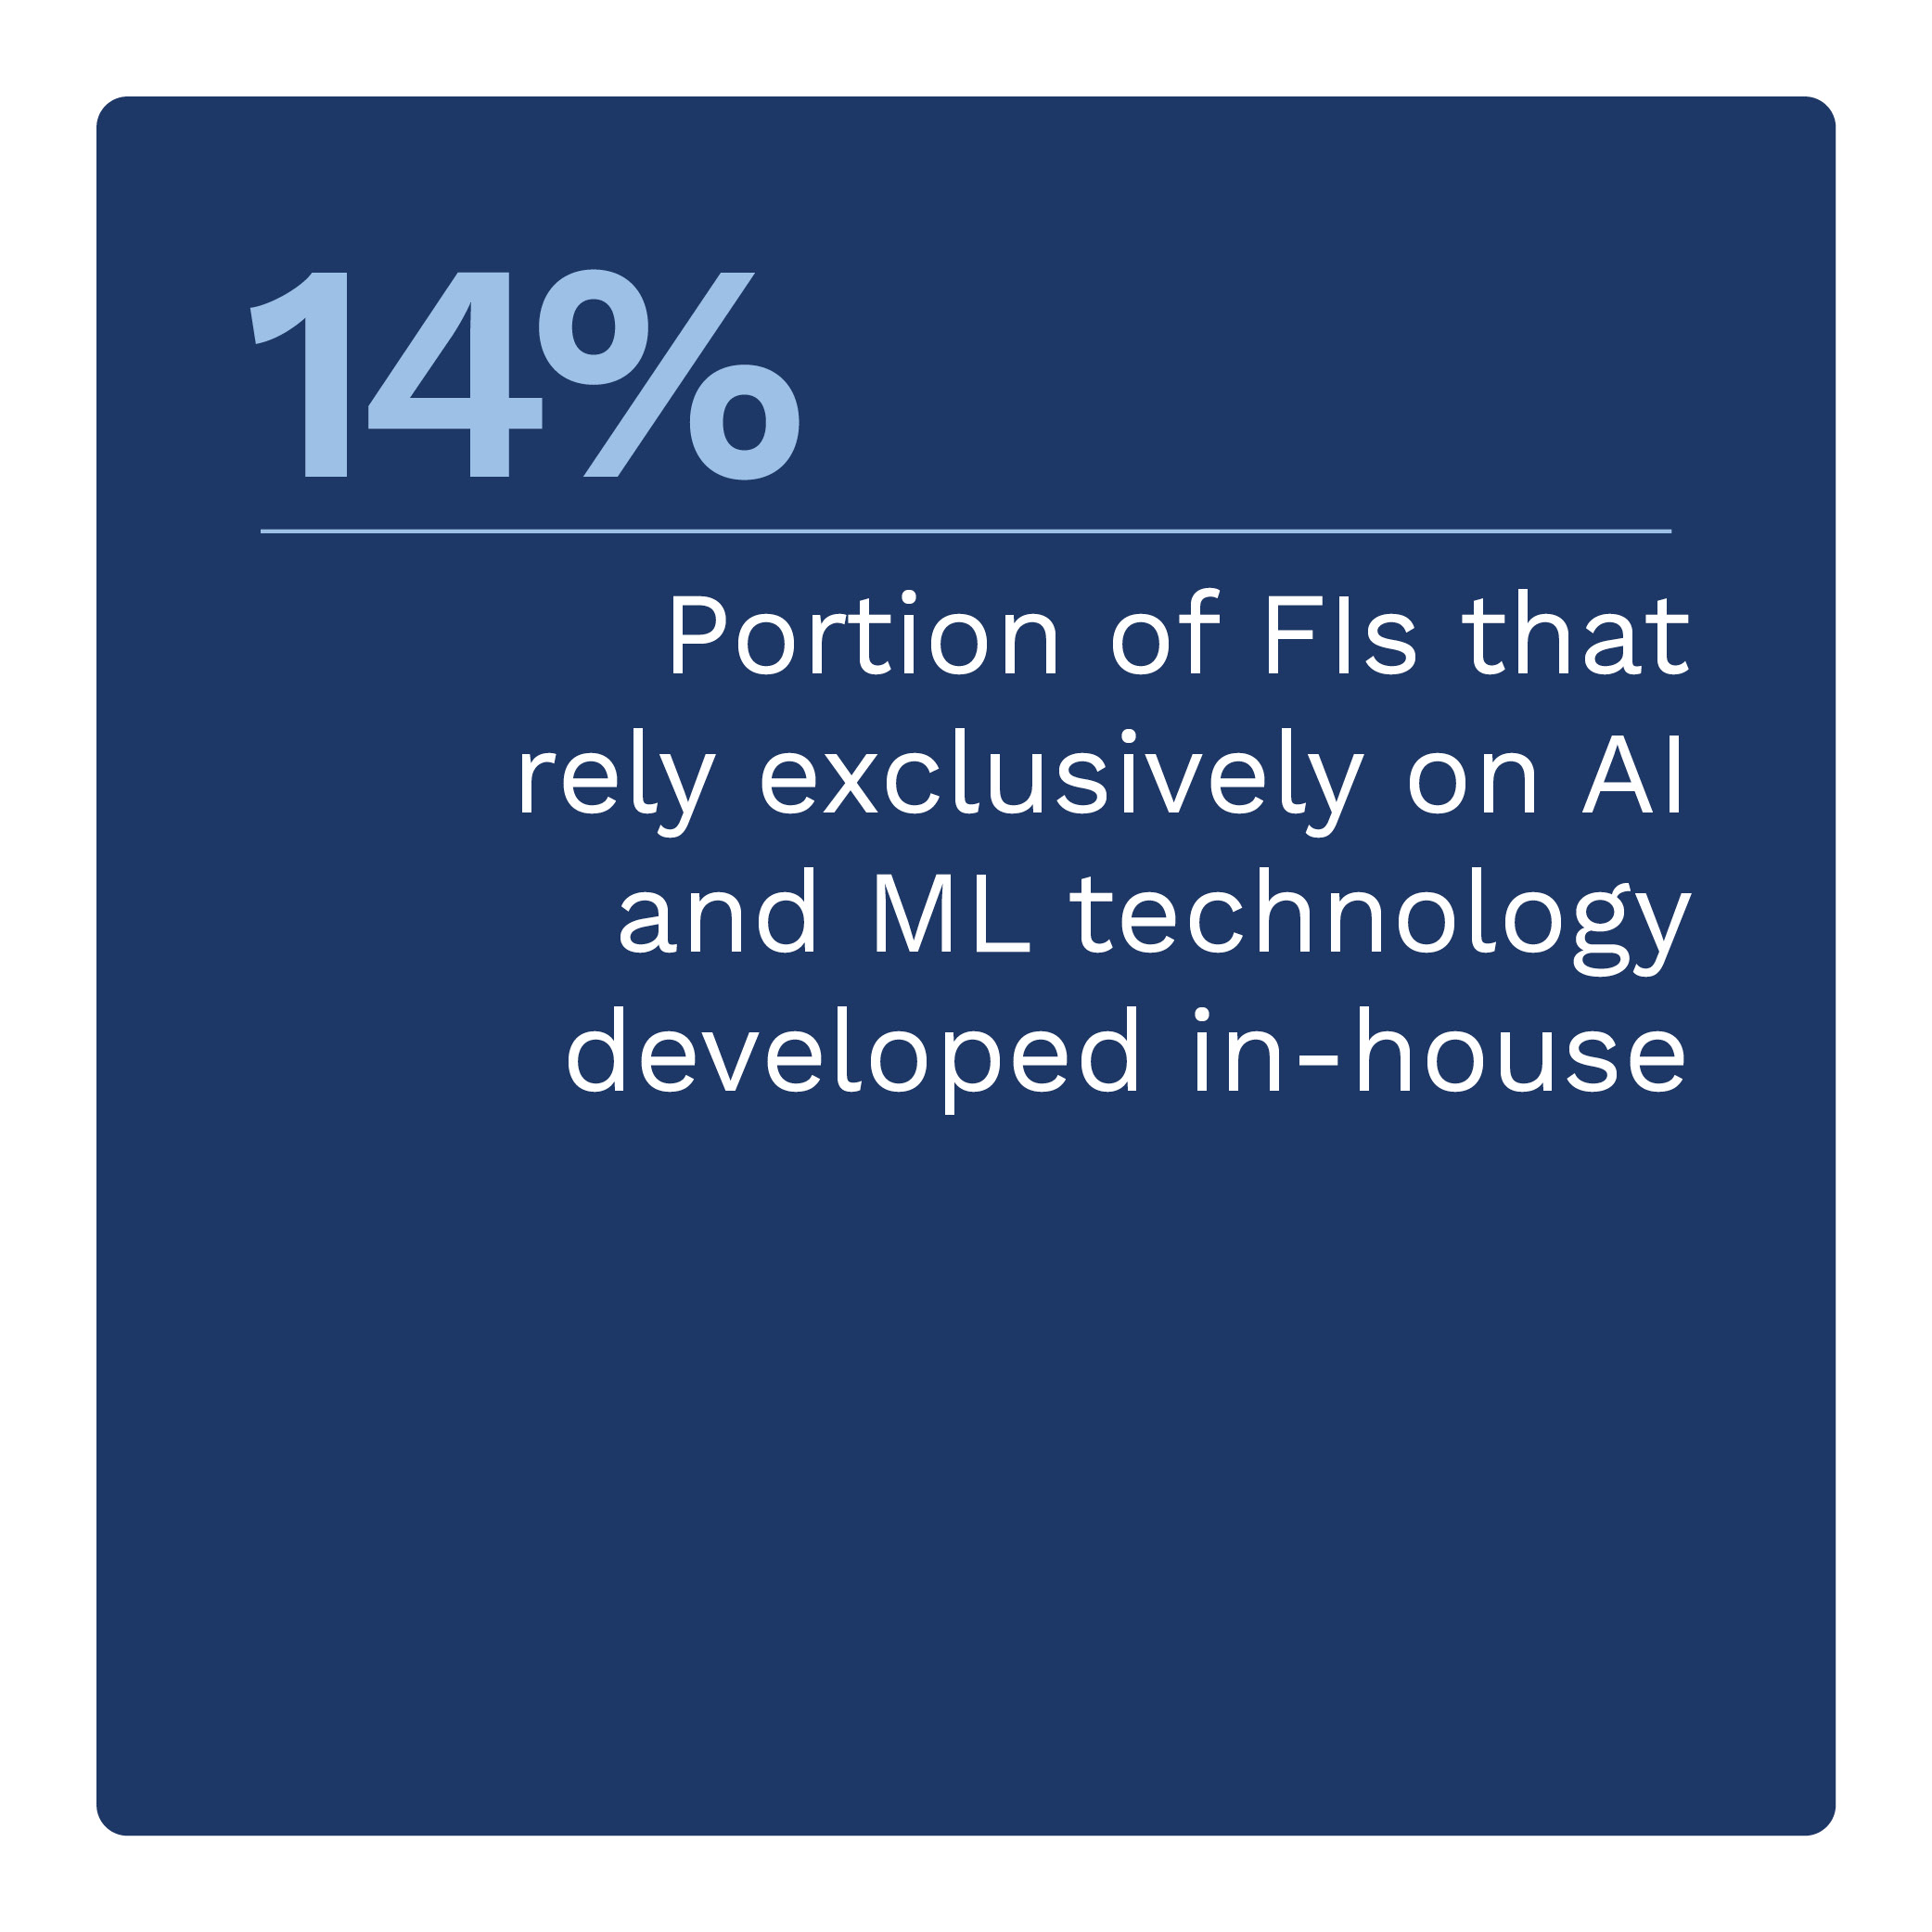 14%: Portion of FIs that rely exclusively on AI and ML technology developed in-house